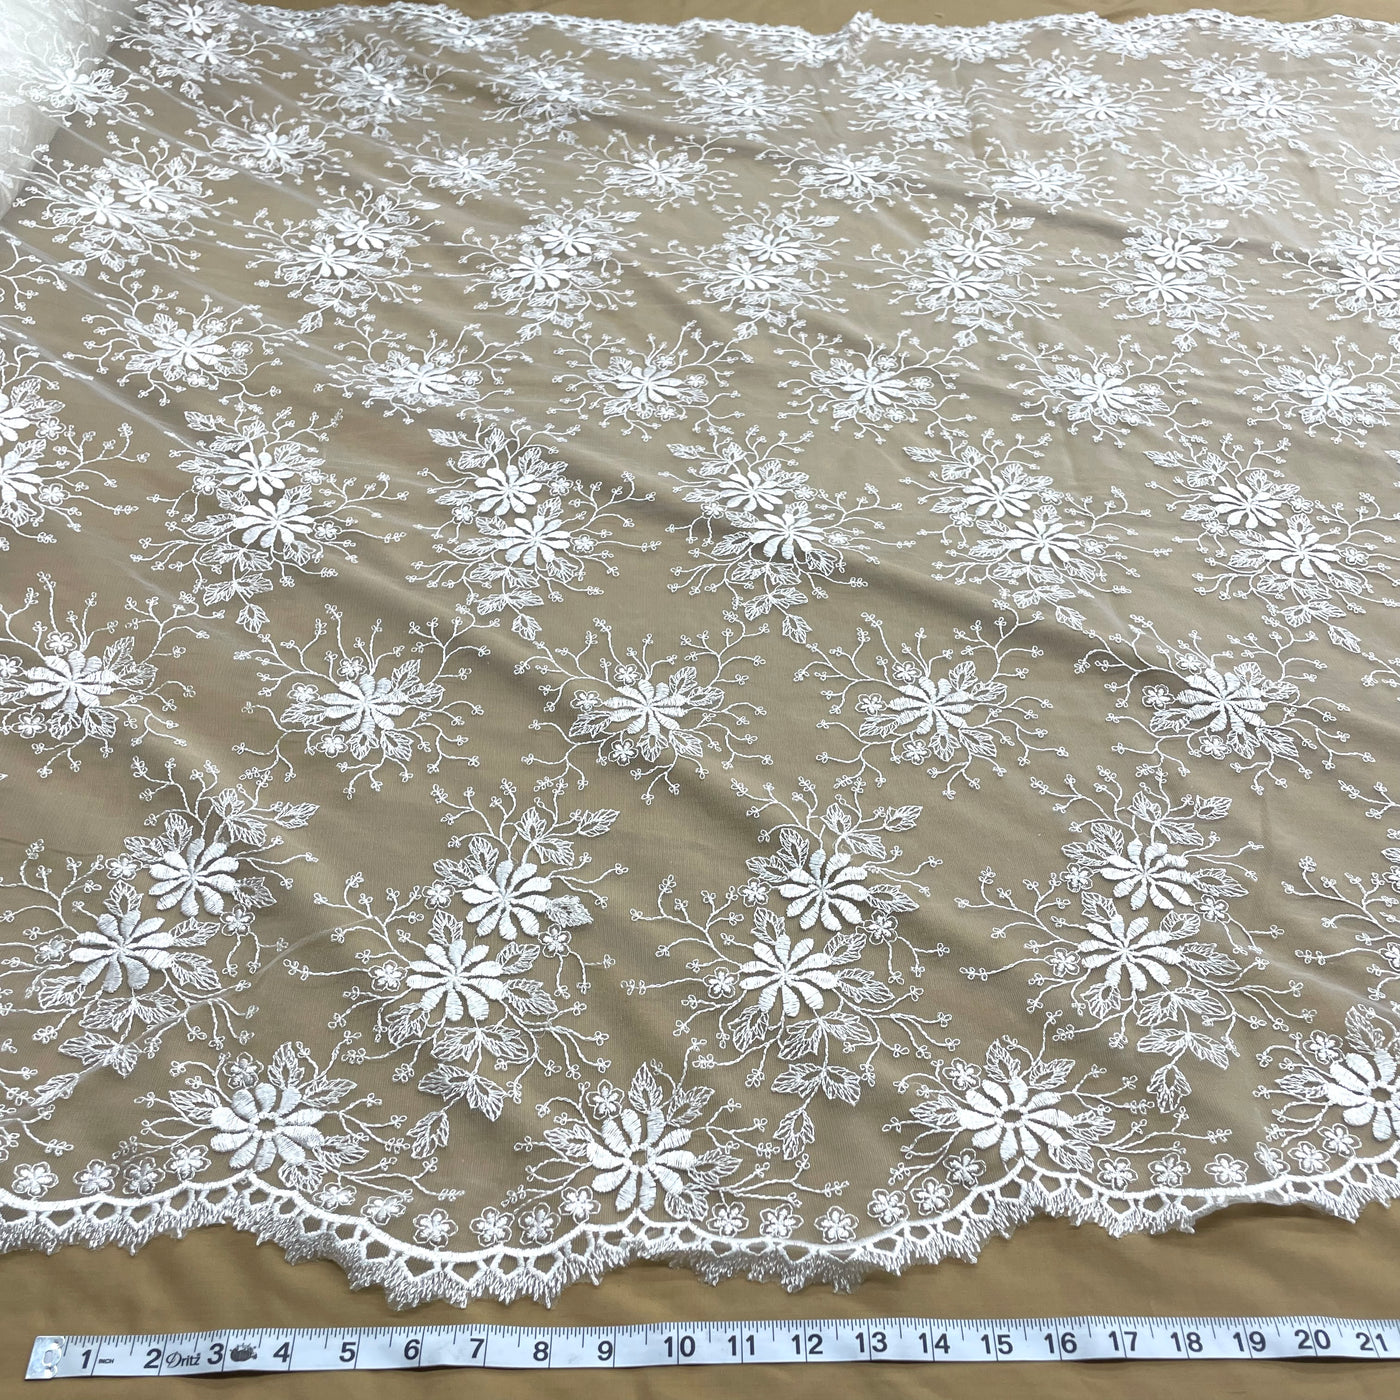 Floral Lace Fabric Embroidered on 100% Polyester Net Mesh | Lace USA